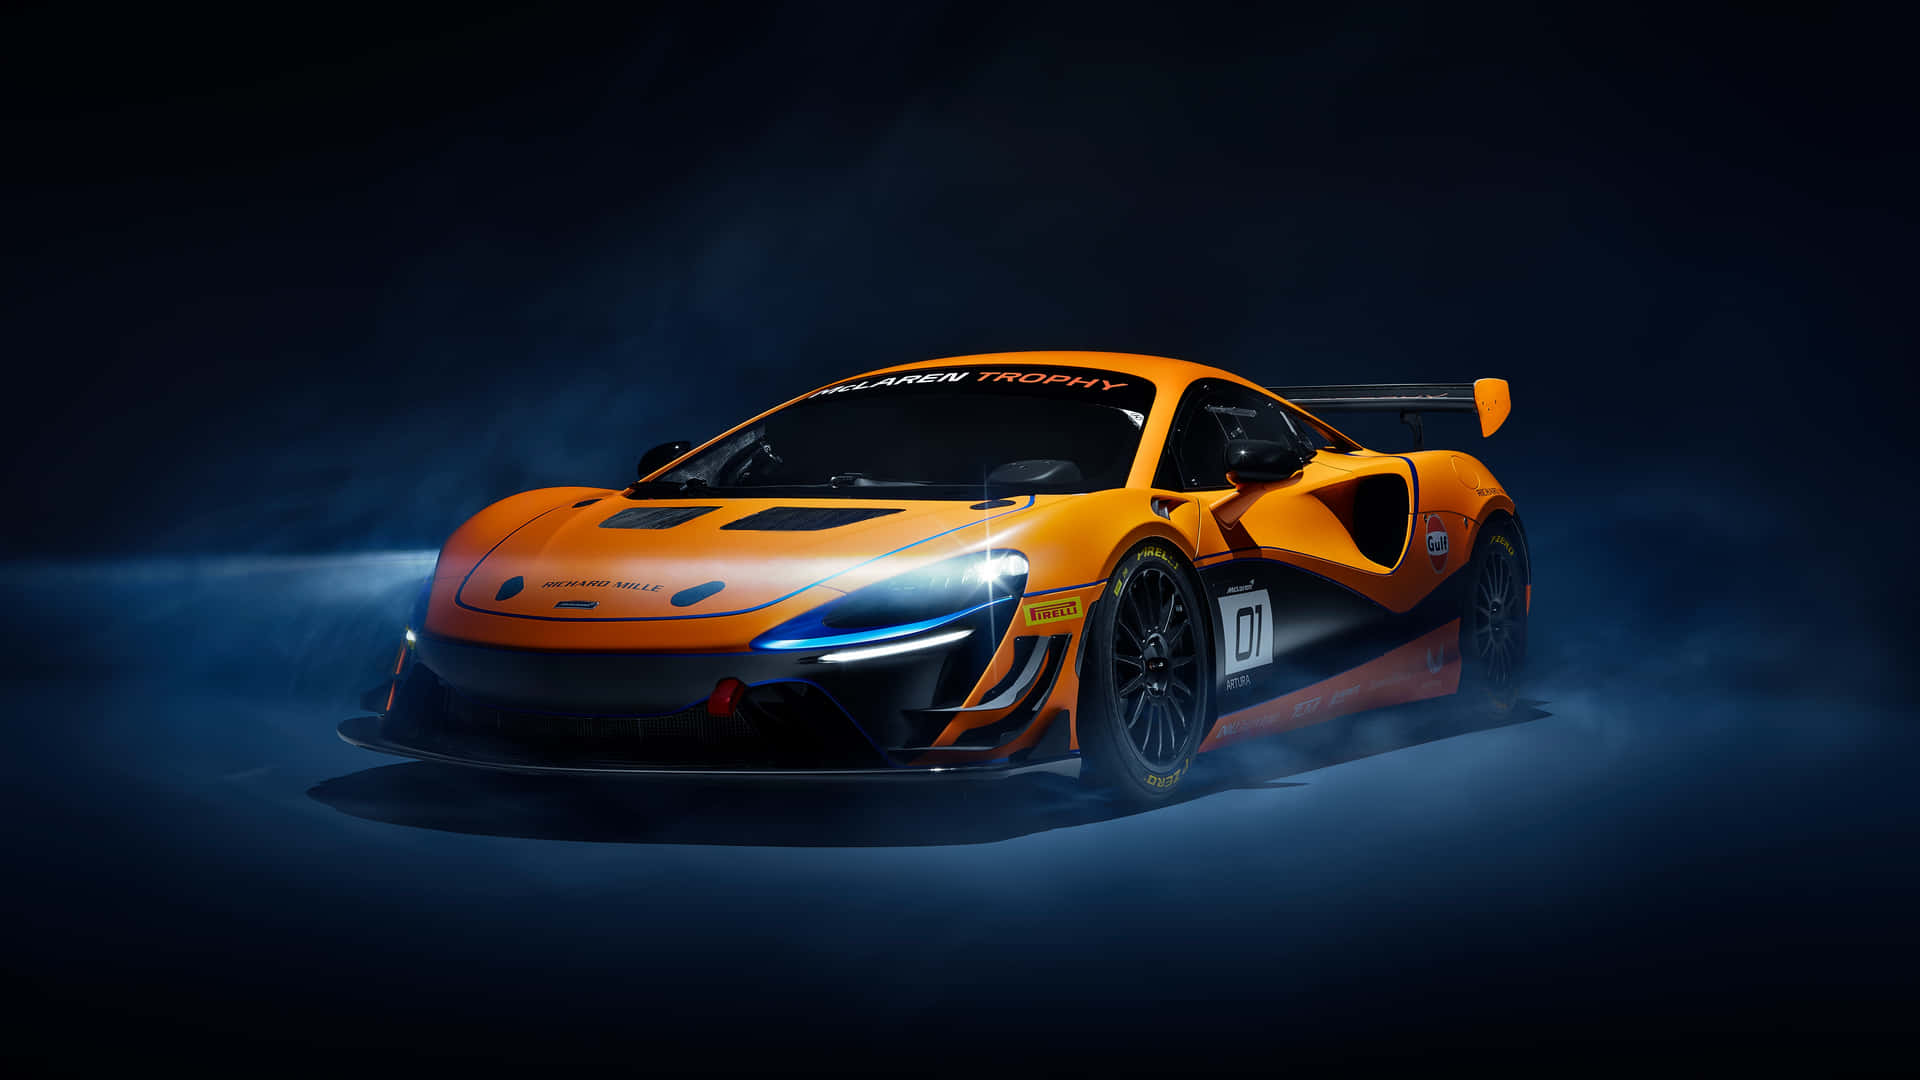 "Exceeding the Limits: The High Speed McLaren on Track"